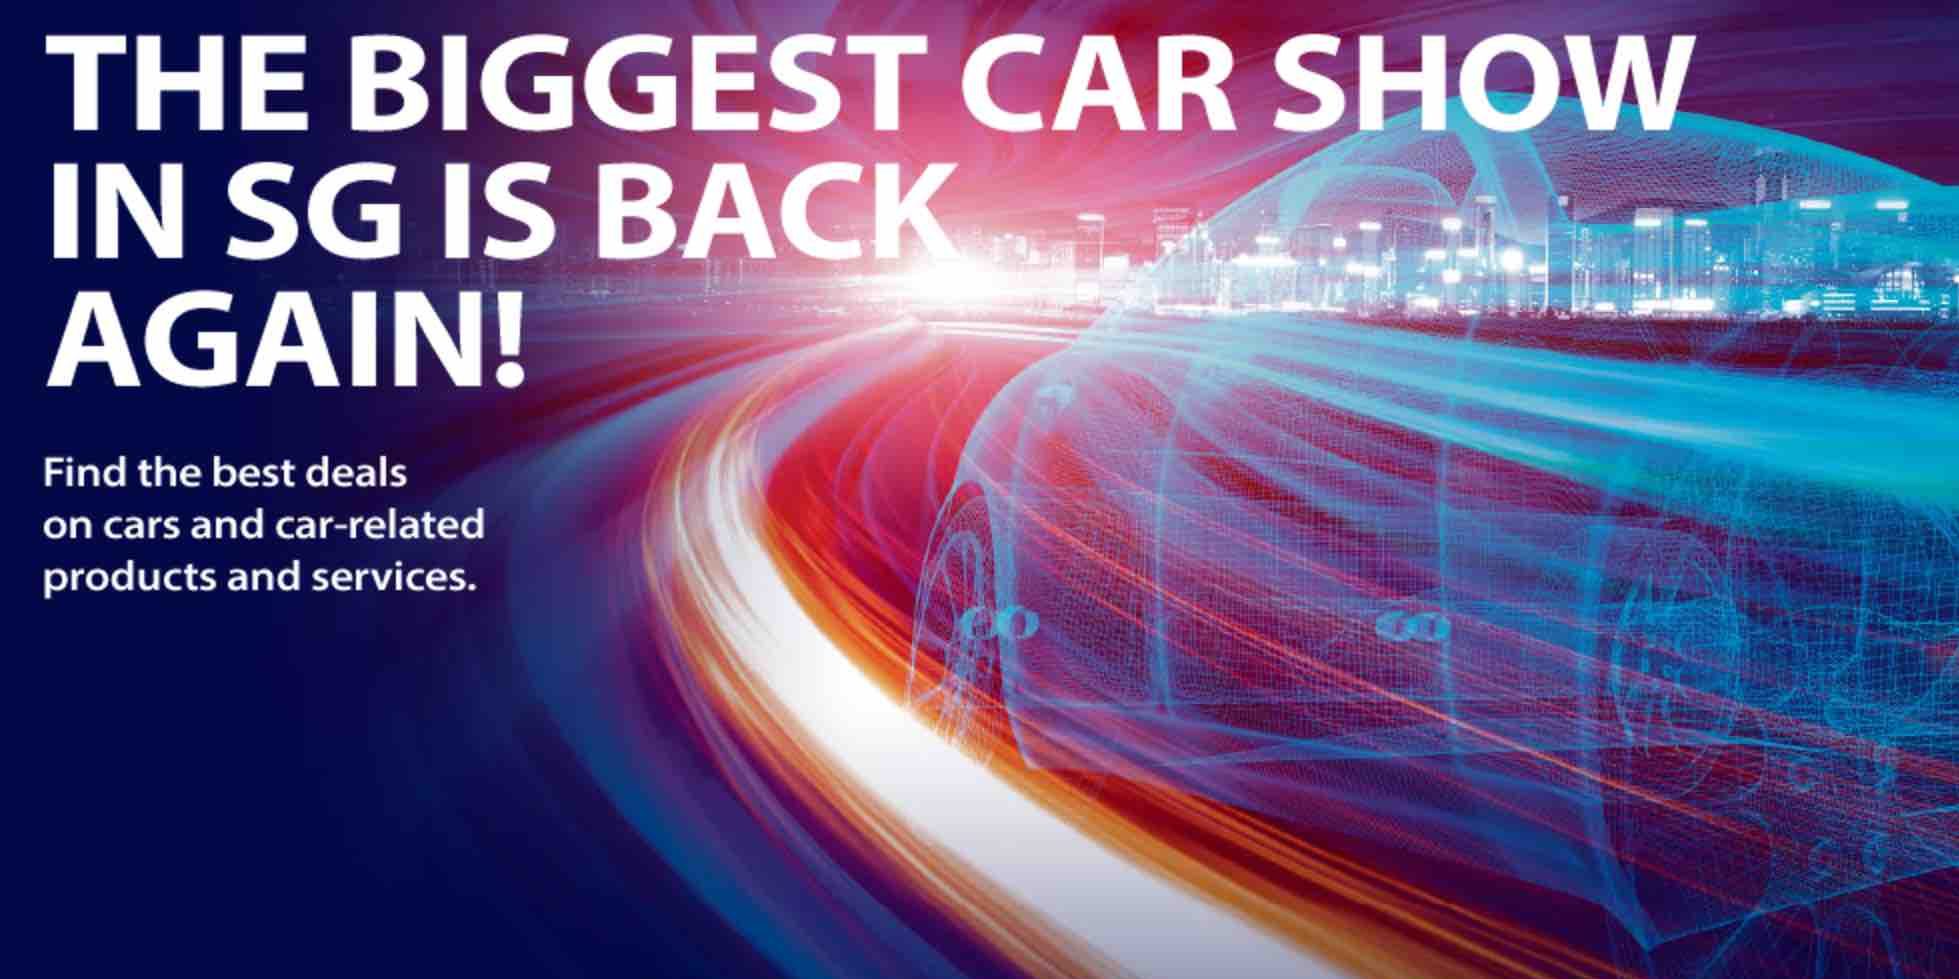 The Cars at Expo The Biggest Car Show in SG Best Promotions & Deals 6-7 May 2017